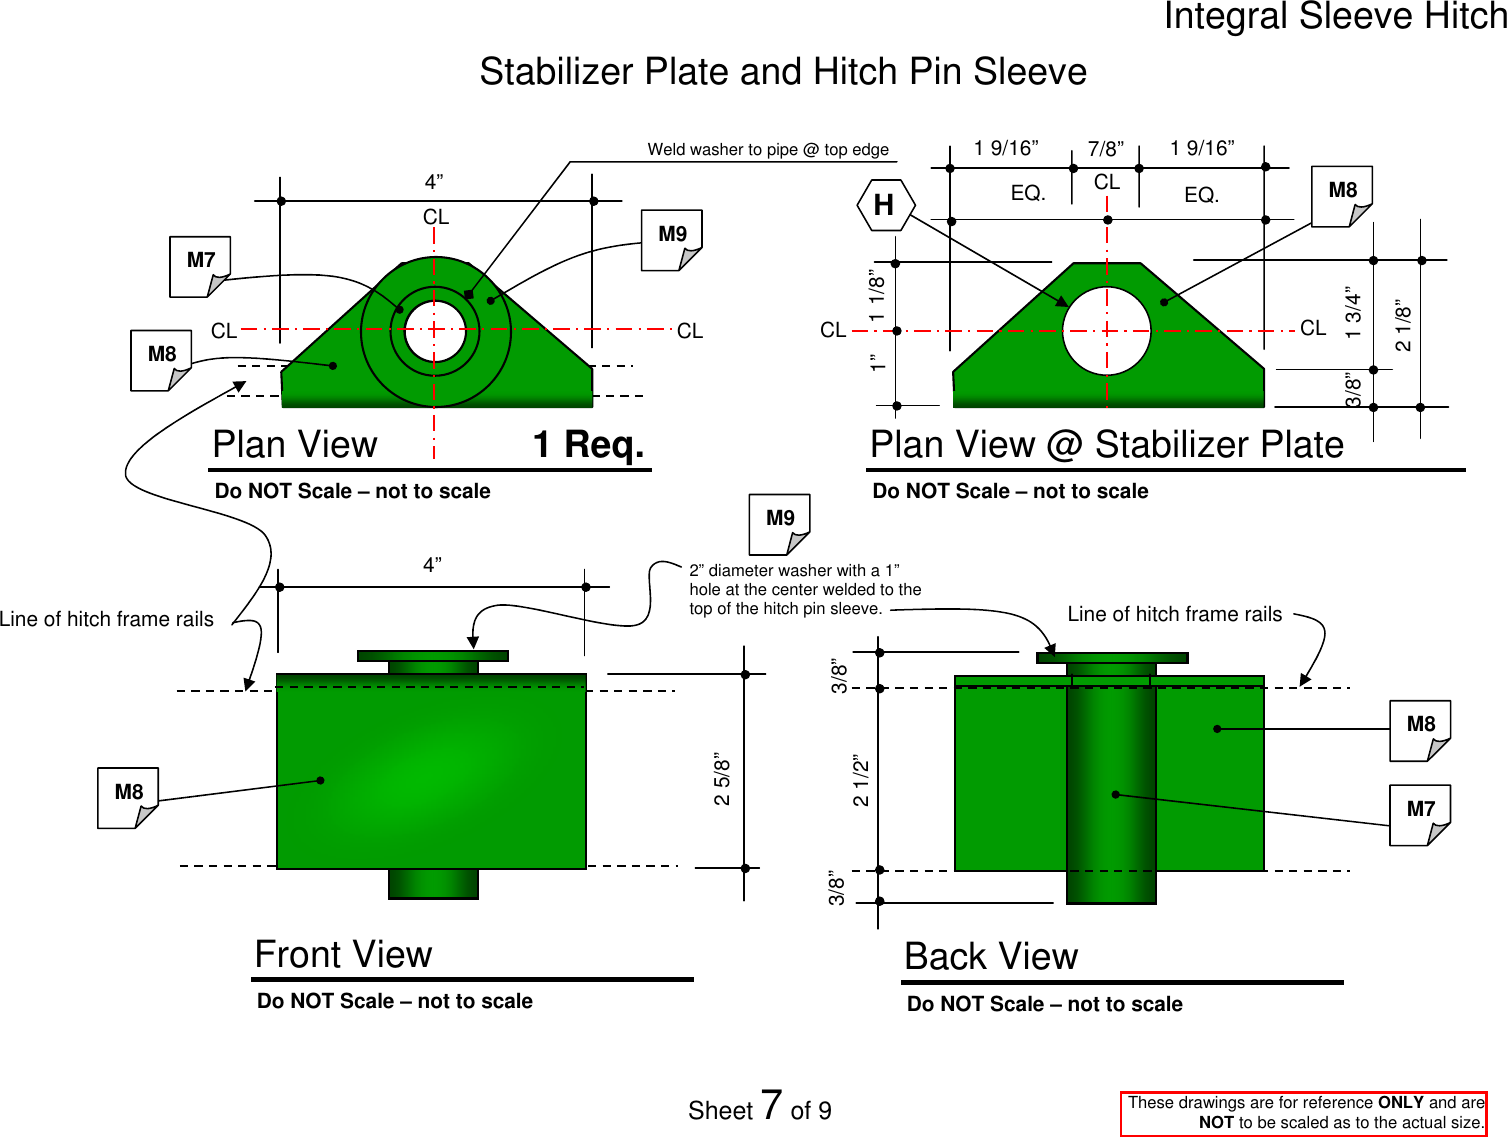 Page 7 of 9 - Integral Sleeve Hitch Dimension Drawings (AM31668) As Of 20081016 Drawings(AM31668)